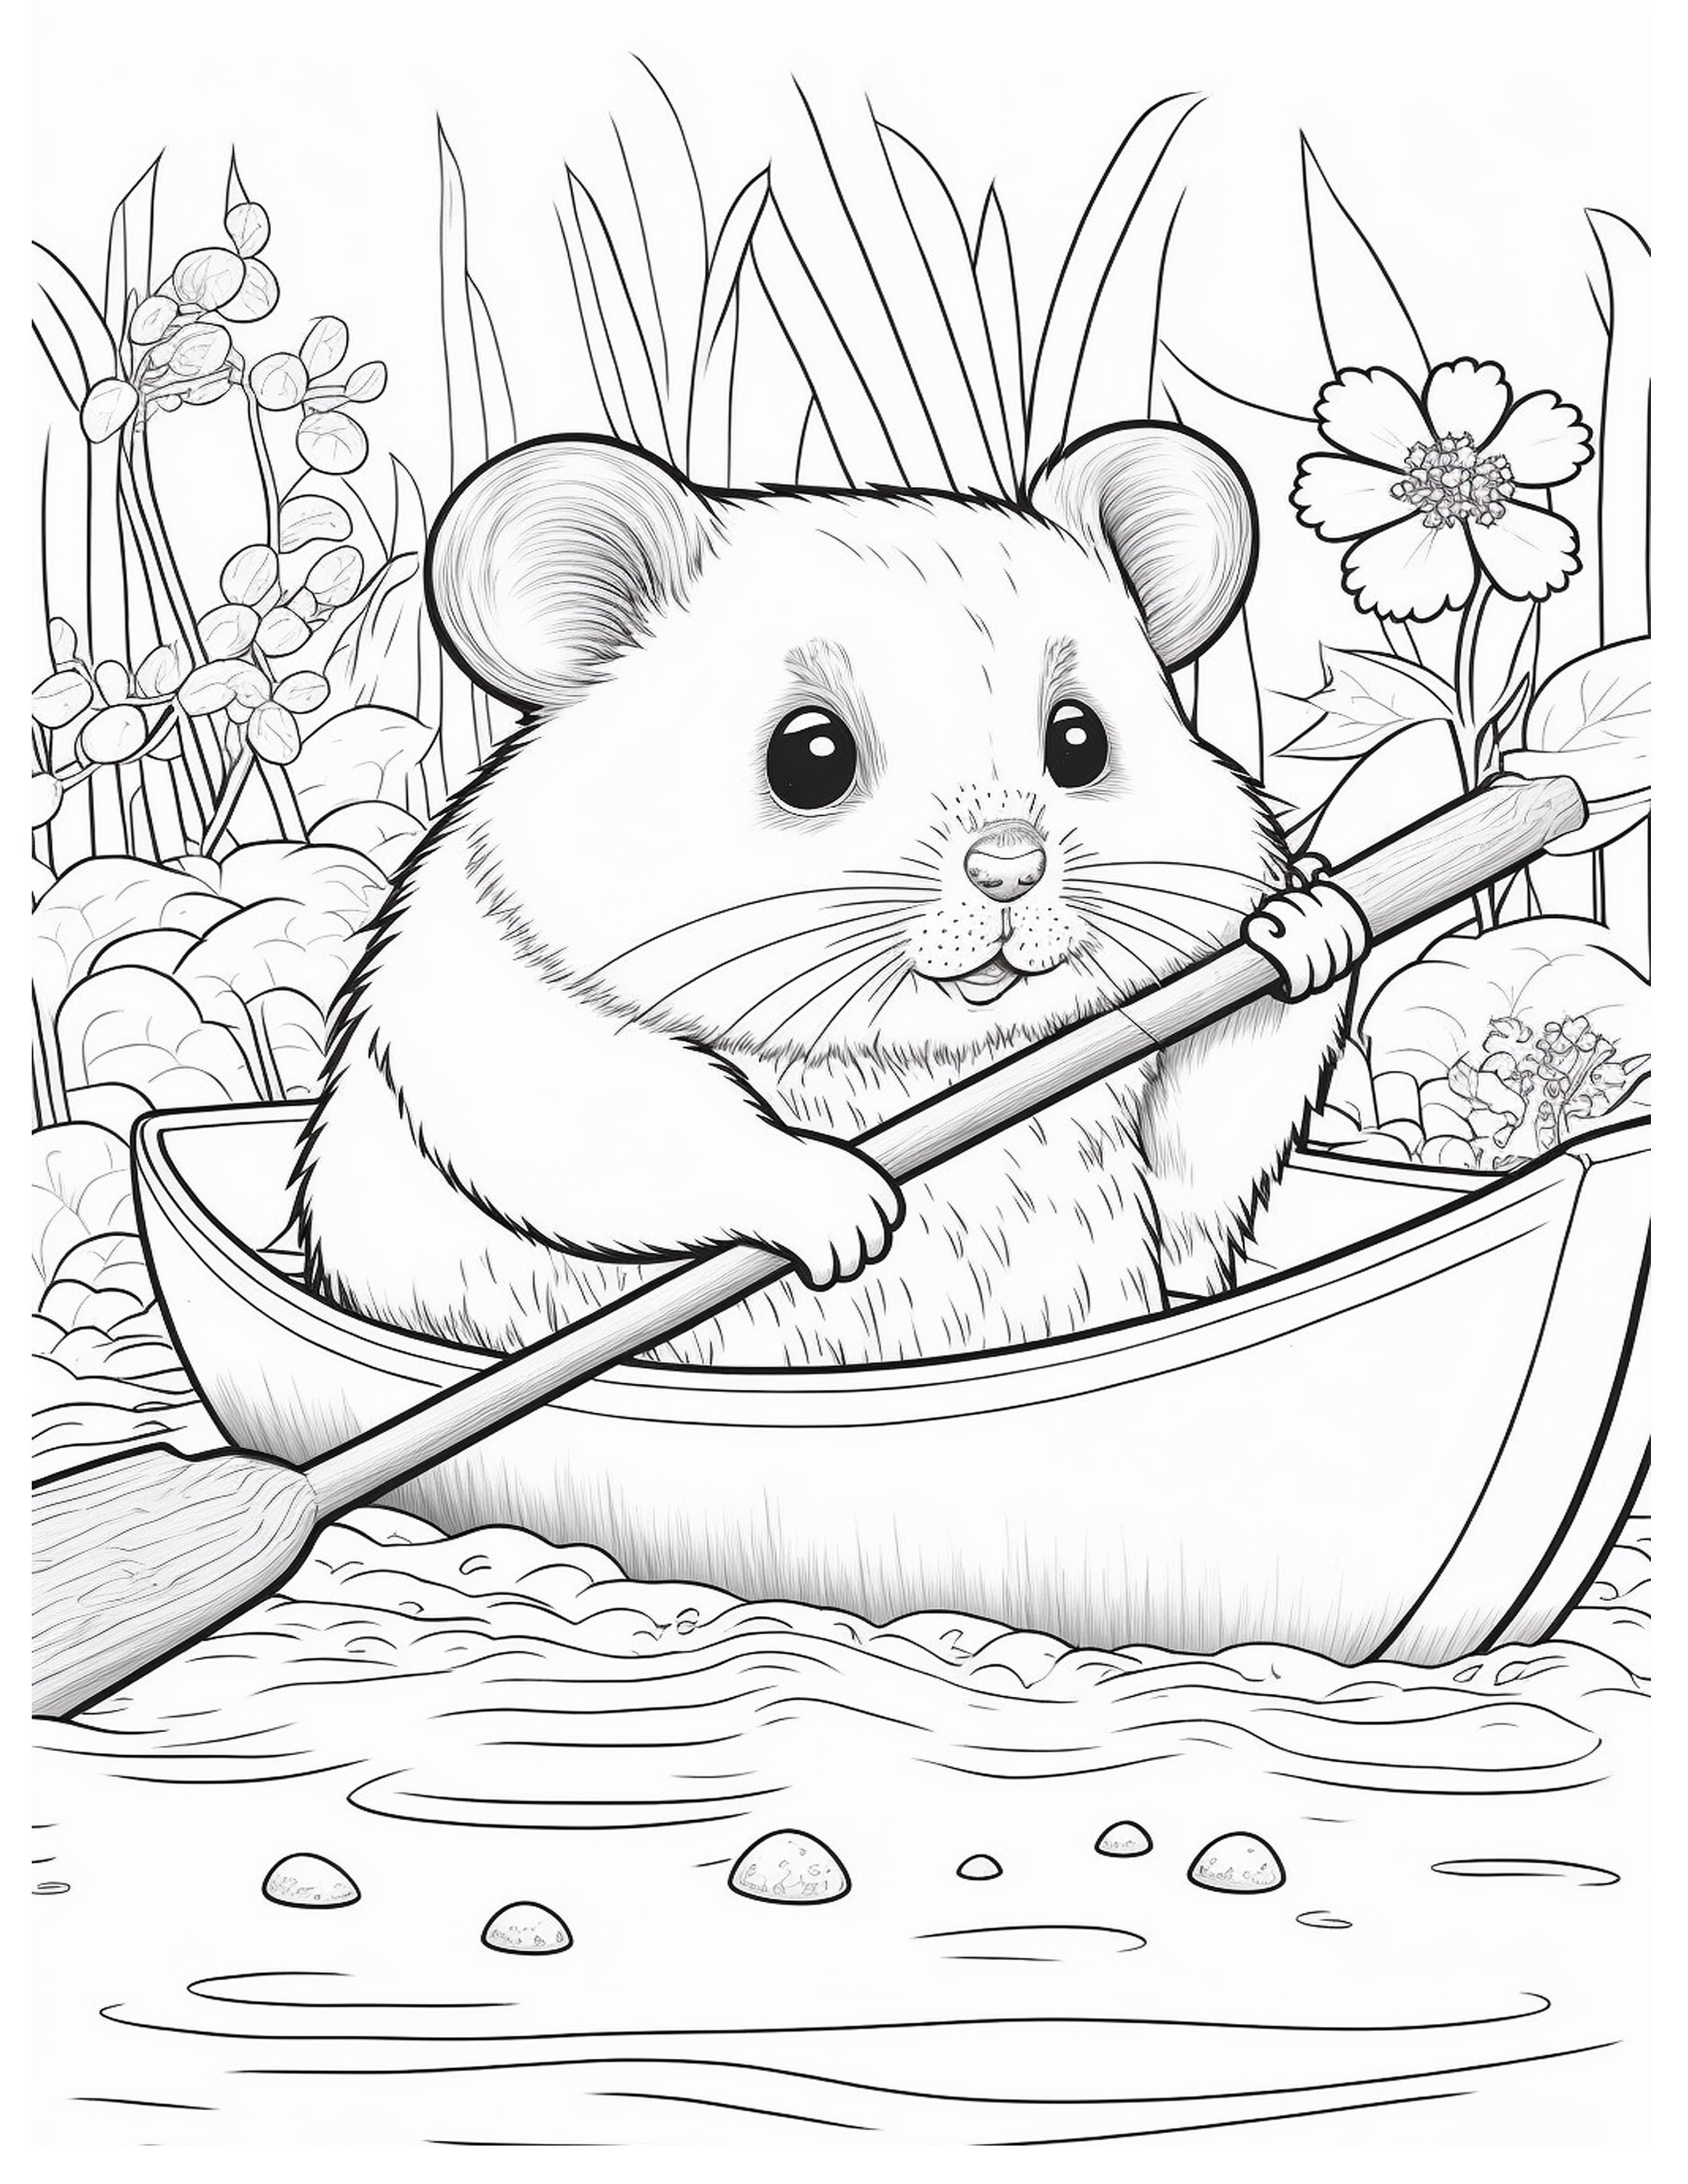 Hamster Coloring Page Over 50 Pages Of Hamsters In Everyday Coloring Home